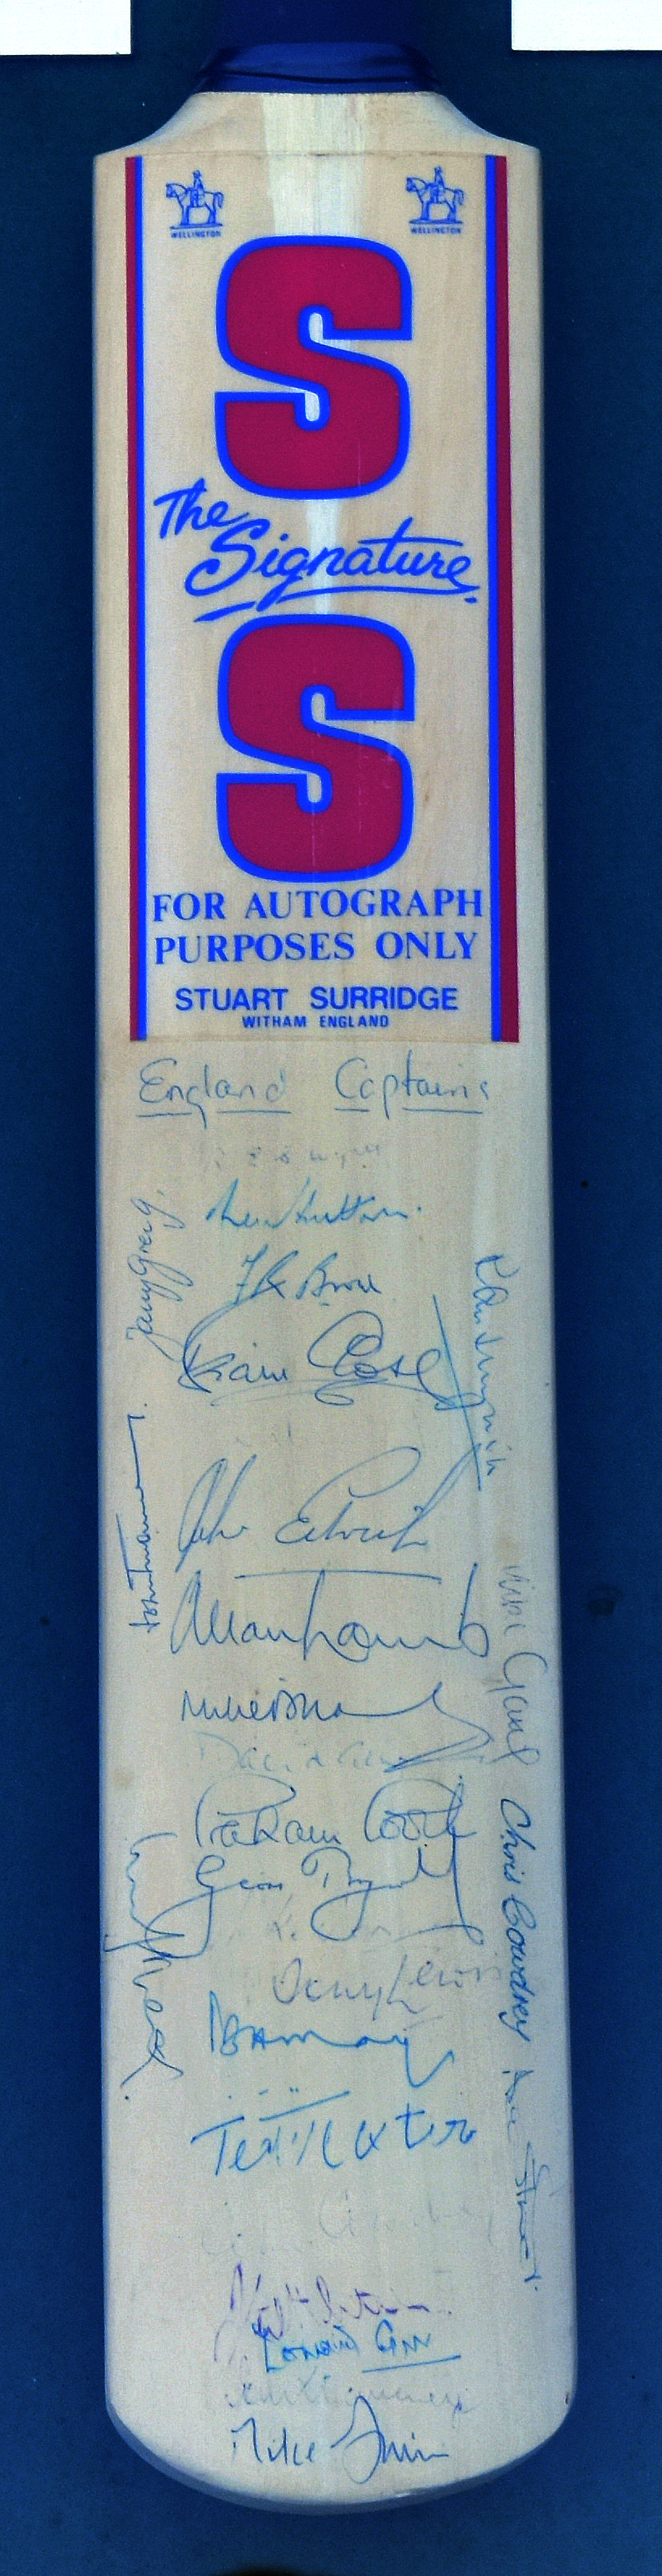 England Captains 1954-1994 Signed Cricket Bat includes 28 signatures to include Wyatt, Brown, Close, - Image 2 of 2